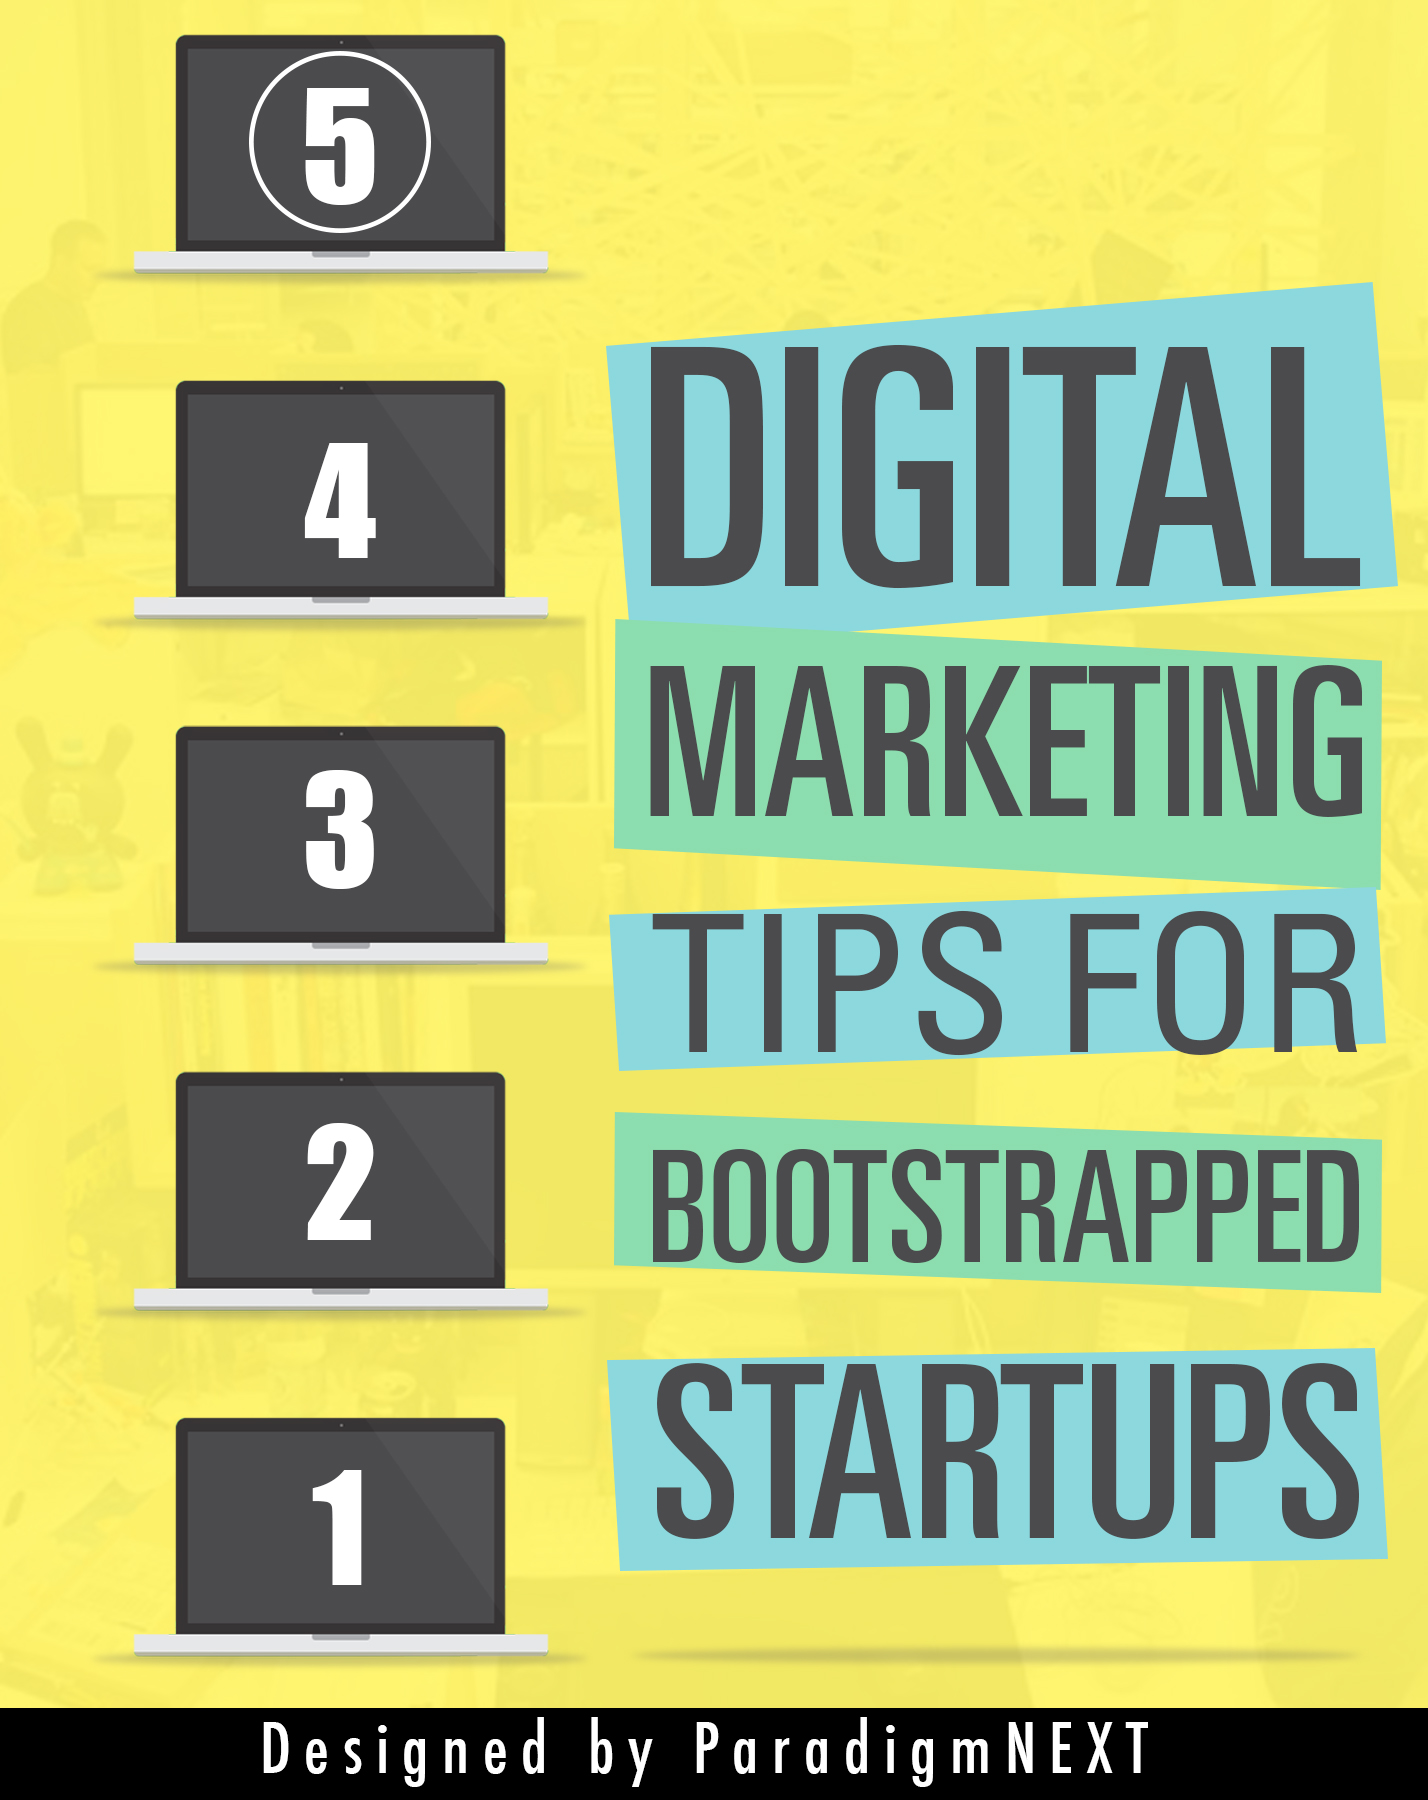 ParadigmNEXT: 5 Digital Marketing Tips for Bootstrapped Startups